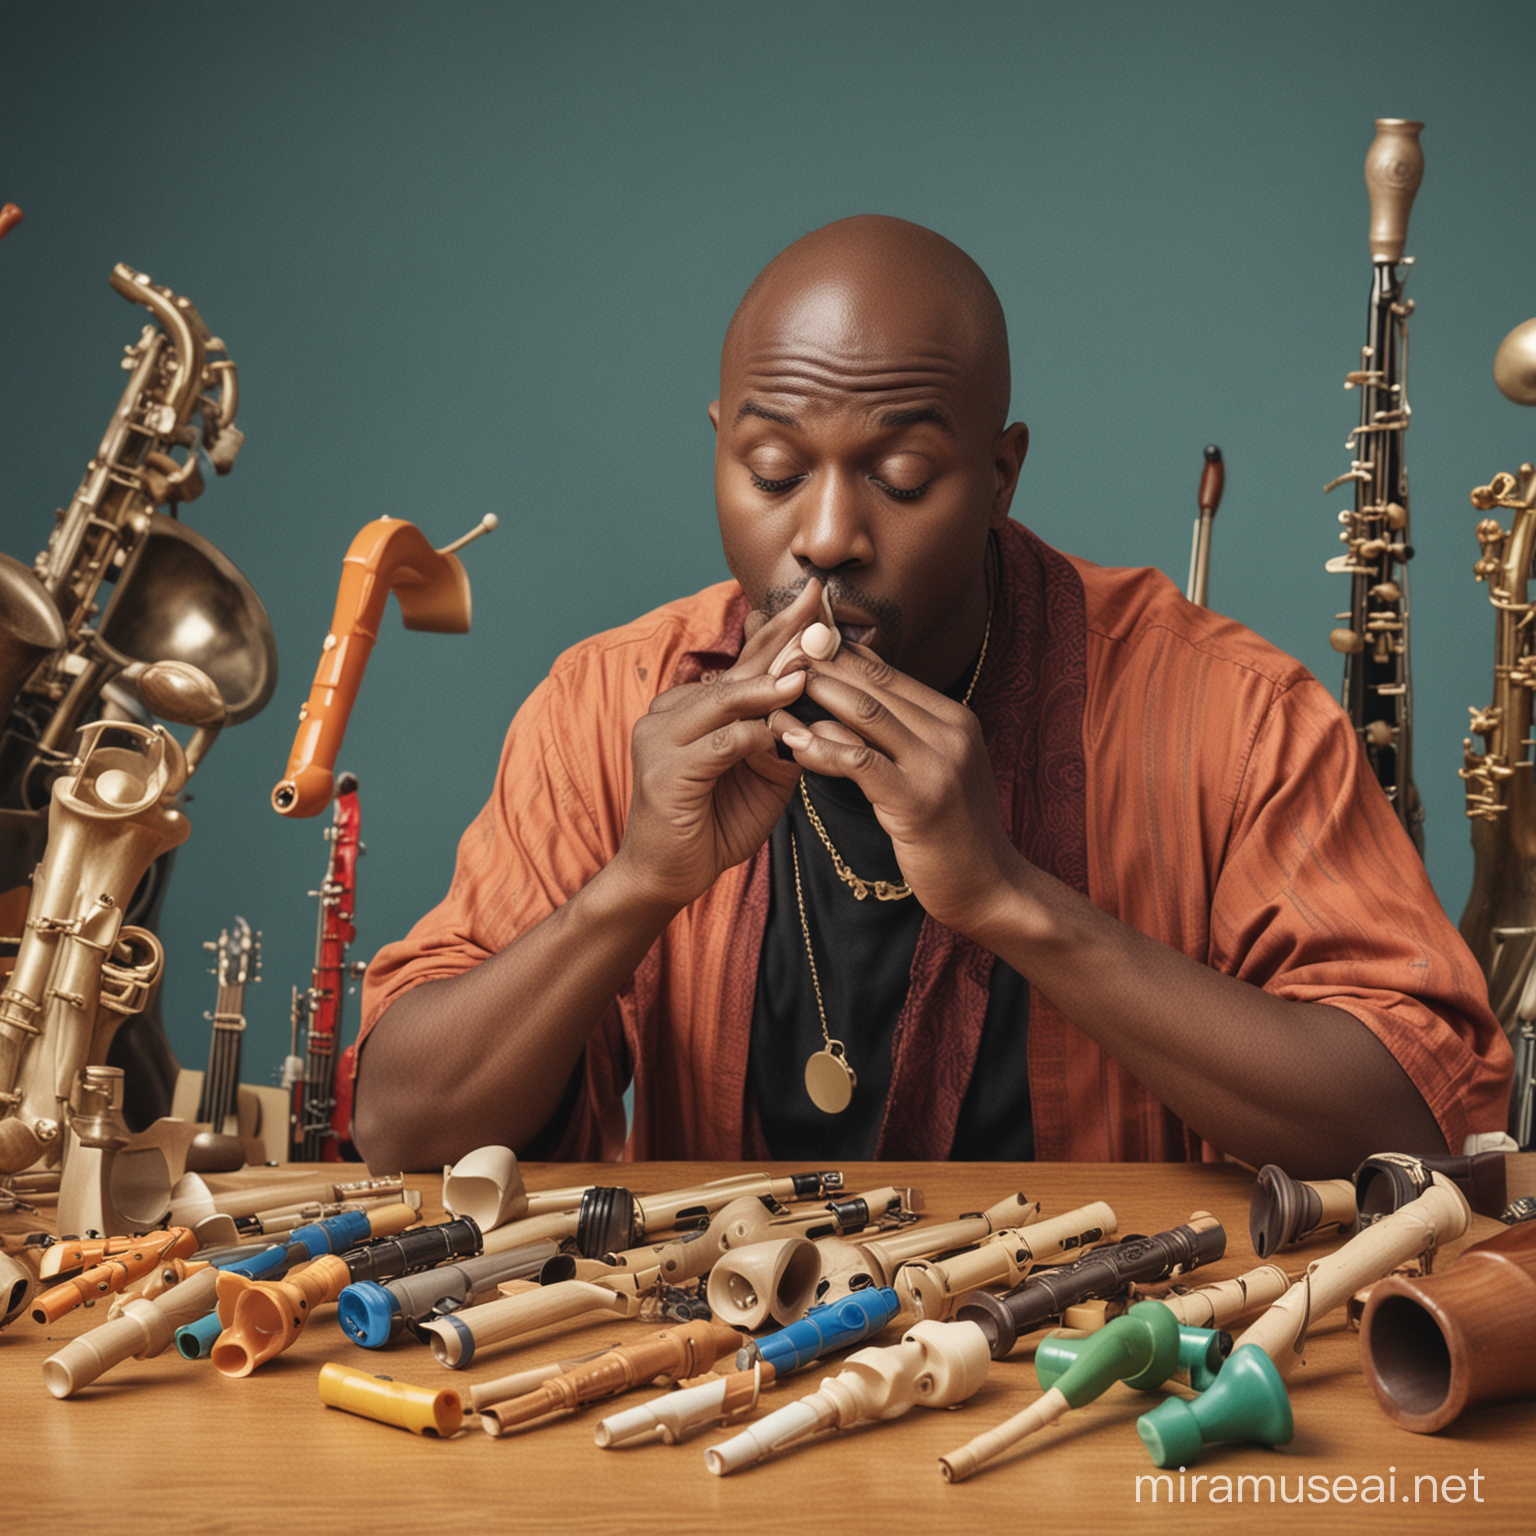 A bald black man playing a kazoo with many other instruments in the background